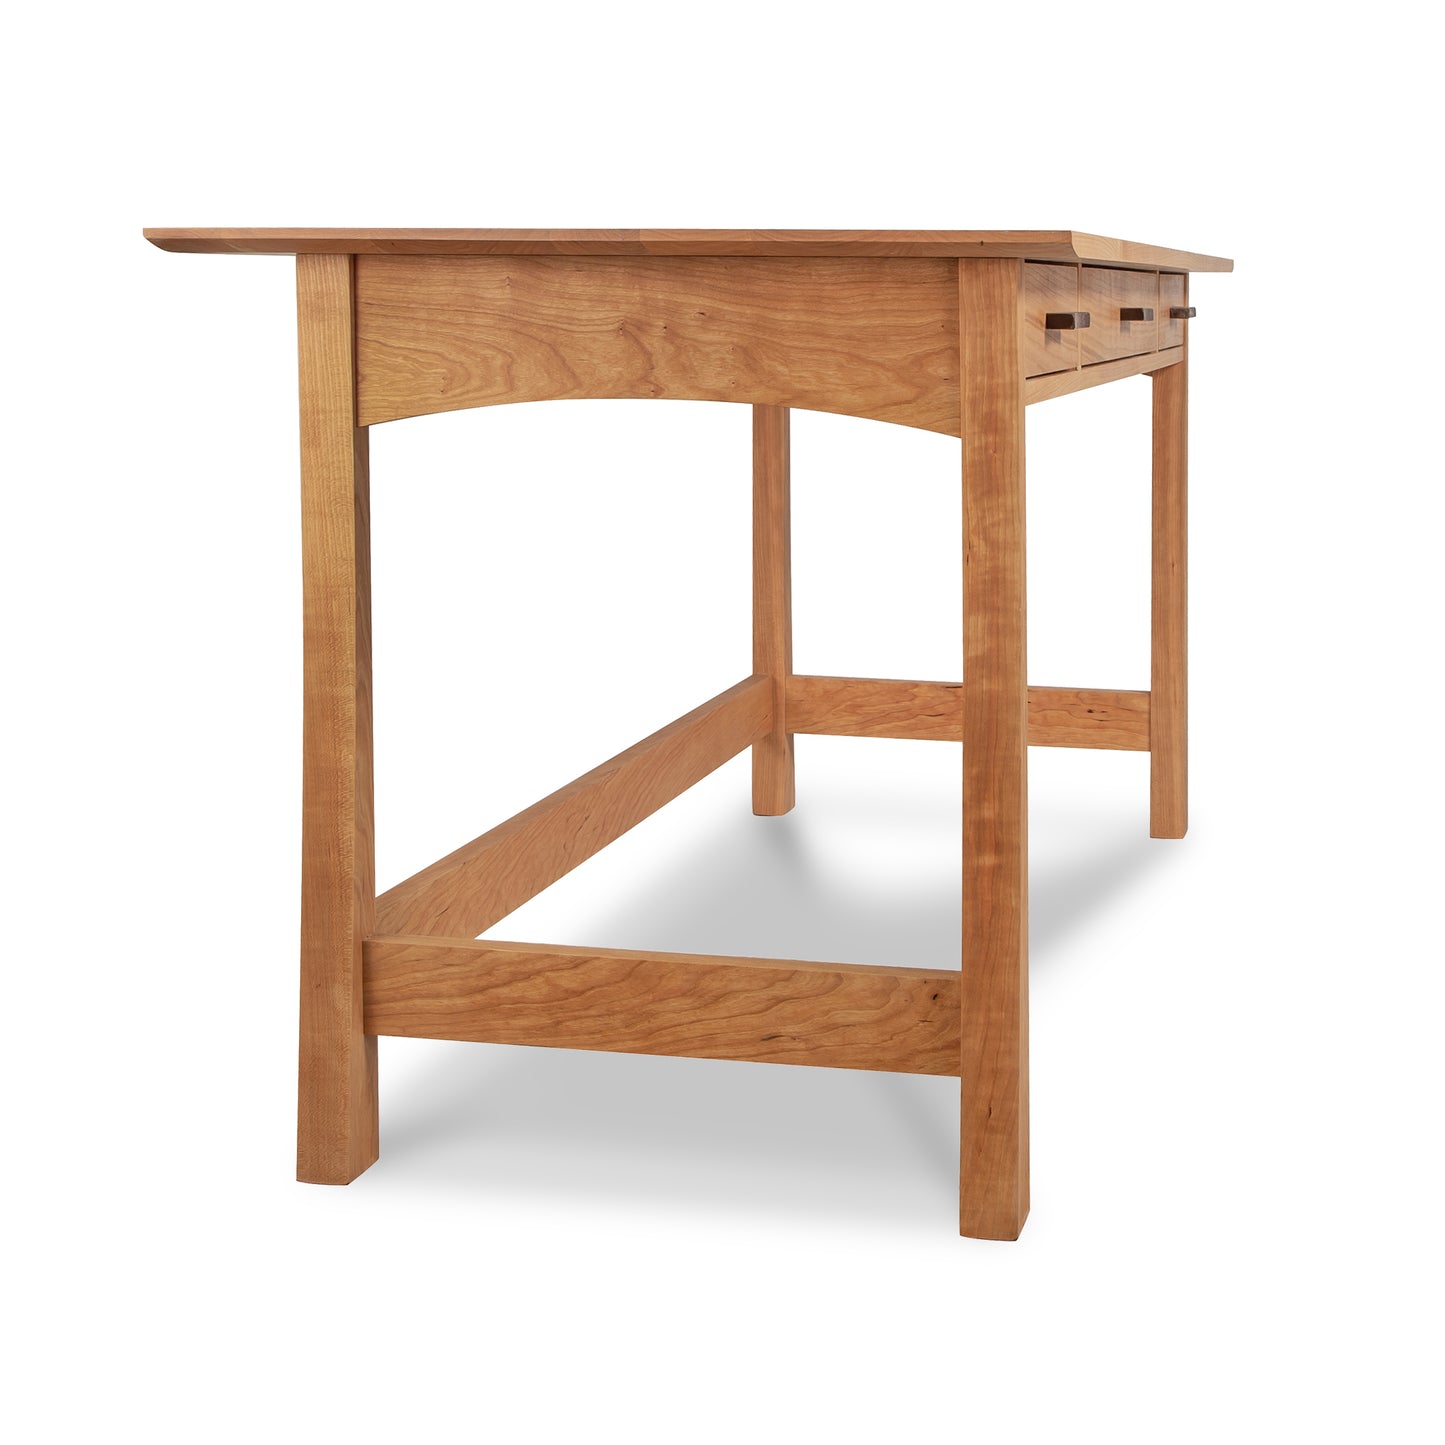 Contemporary Craftsman Library Desk from Vermont Furniture Designs with an open drawer on the right side, isolated against a white background.